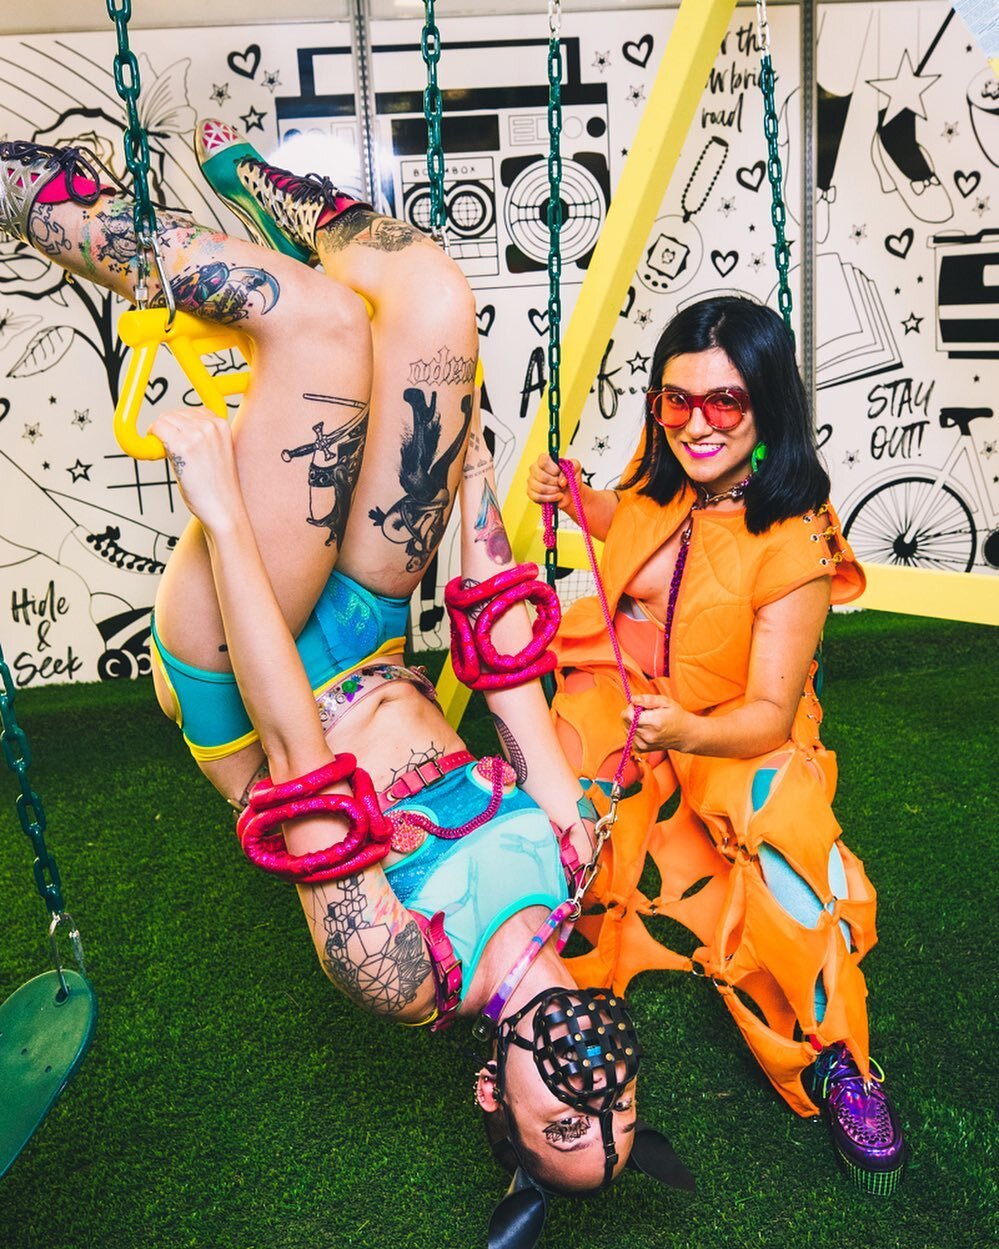 Happy Birthday to @colectivomultipolar , mi amor and fave collaborator! Also happy pride!
[image description: A photo of Sky and Sandra on a swing set with an astroturf floor and a wall with black and white graphic drawings on it. The swing set has y